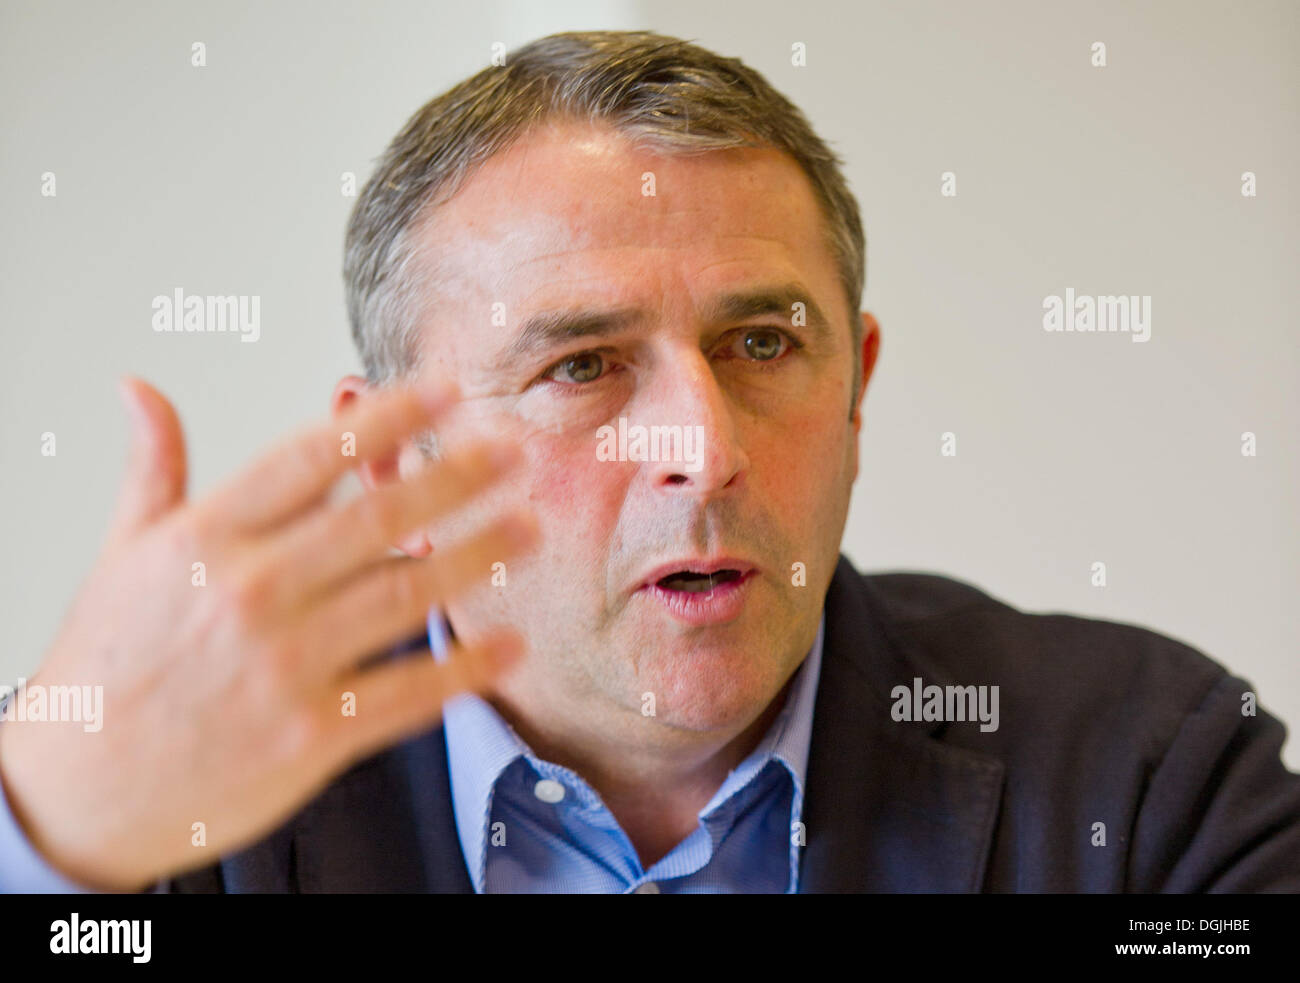 Wolfsburg, Germany. 17th Oct, 2013. Manager of Bundesliga team VfL Wolfsburg Klaus Allofs sits during an interview with the dpa at Volkswagen Arena in Wolfsburg, Germany, 17 October 2013. Photo: Christoph Schmidt/dpa/Alamy Live News Stock Photo